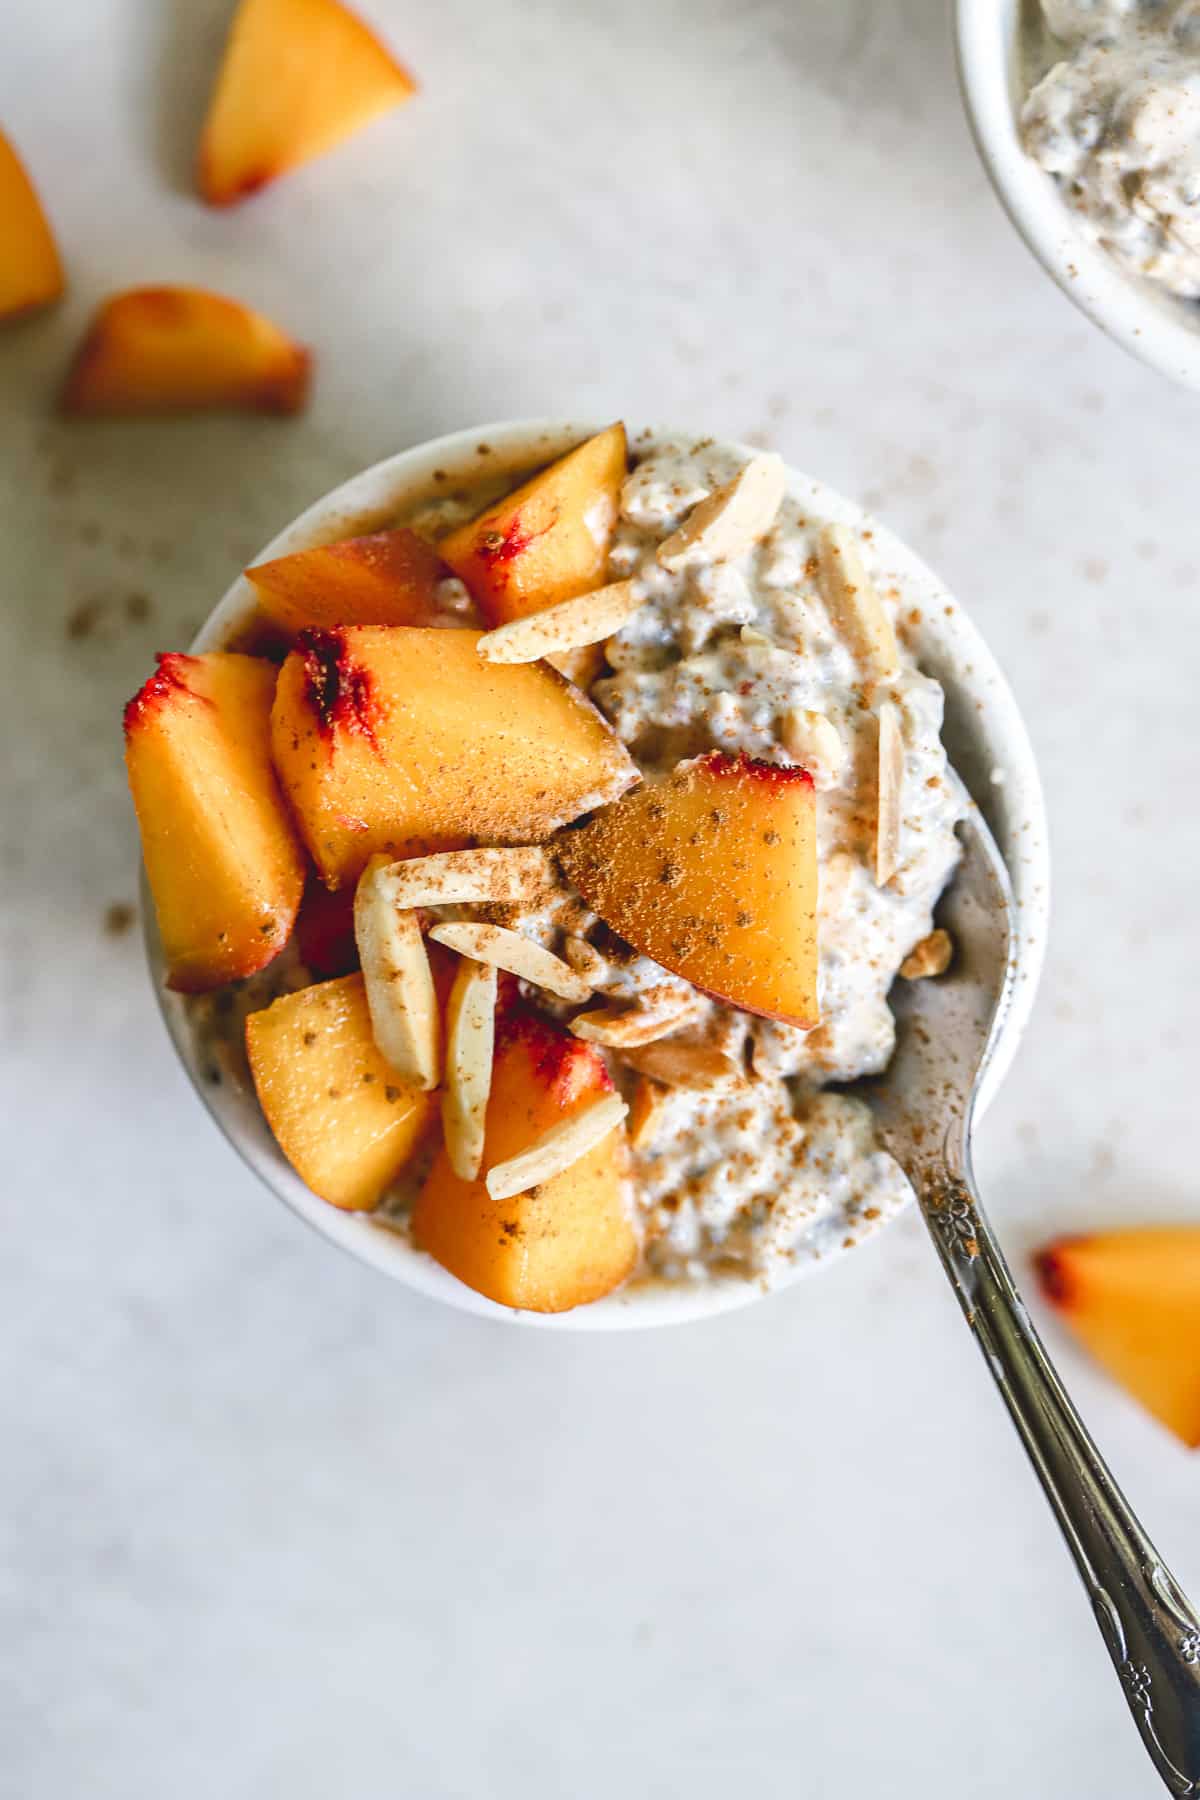 Peach pie overnight oats in small white bowl with diced fresh peaches, slivered almonds, and a dusting of cinnamon